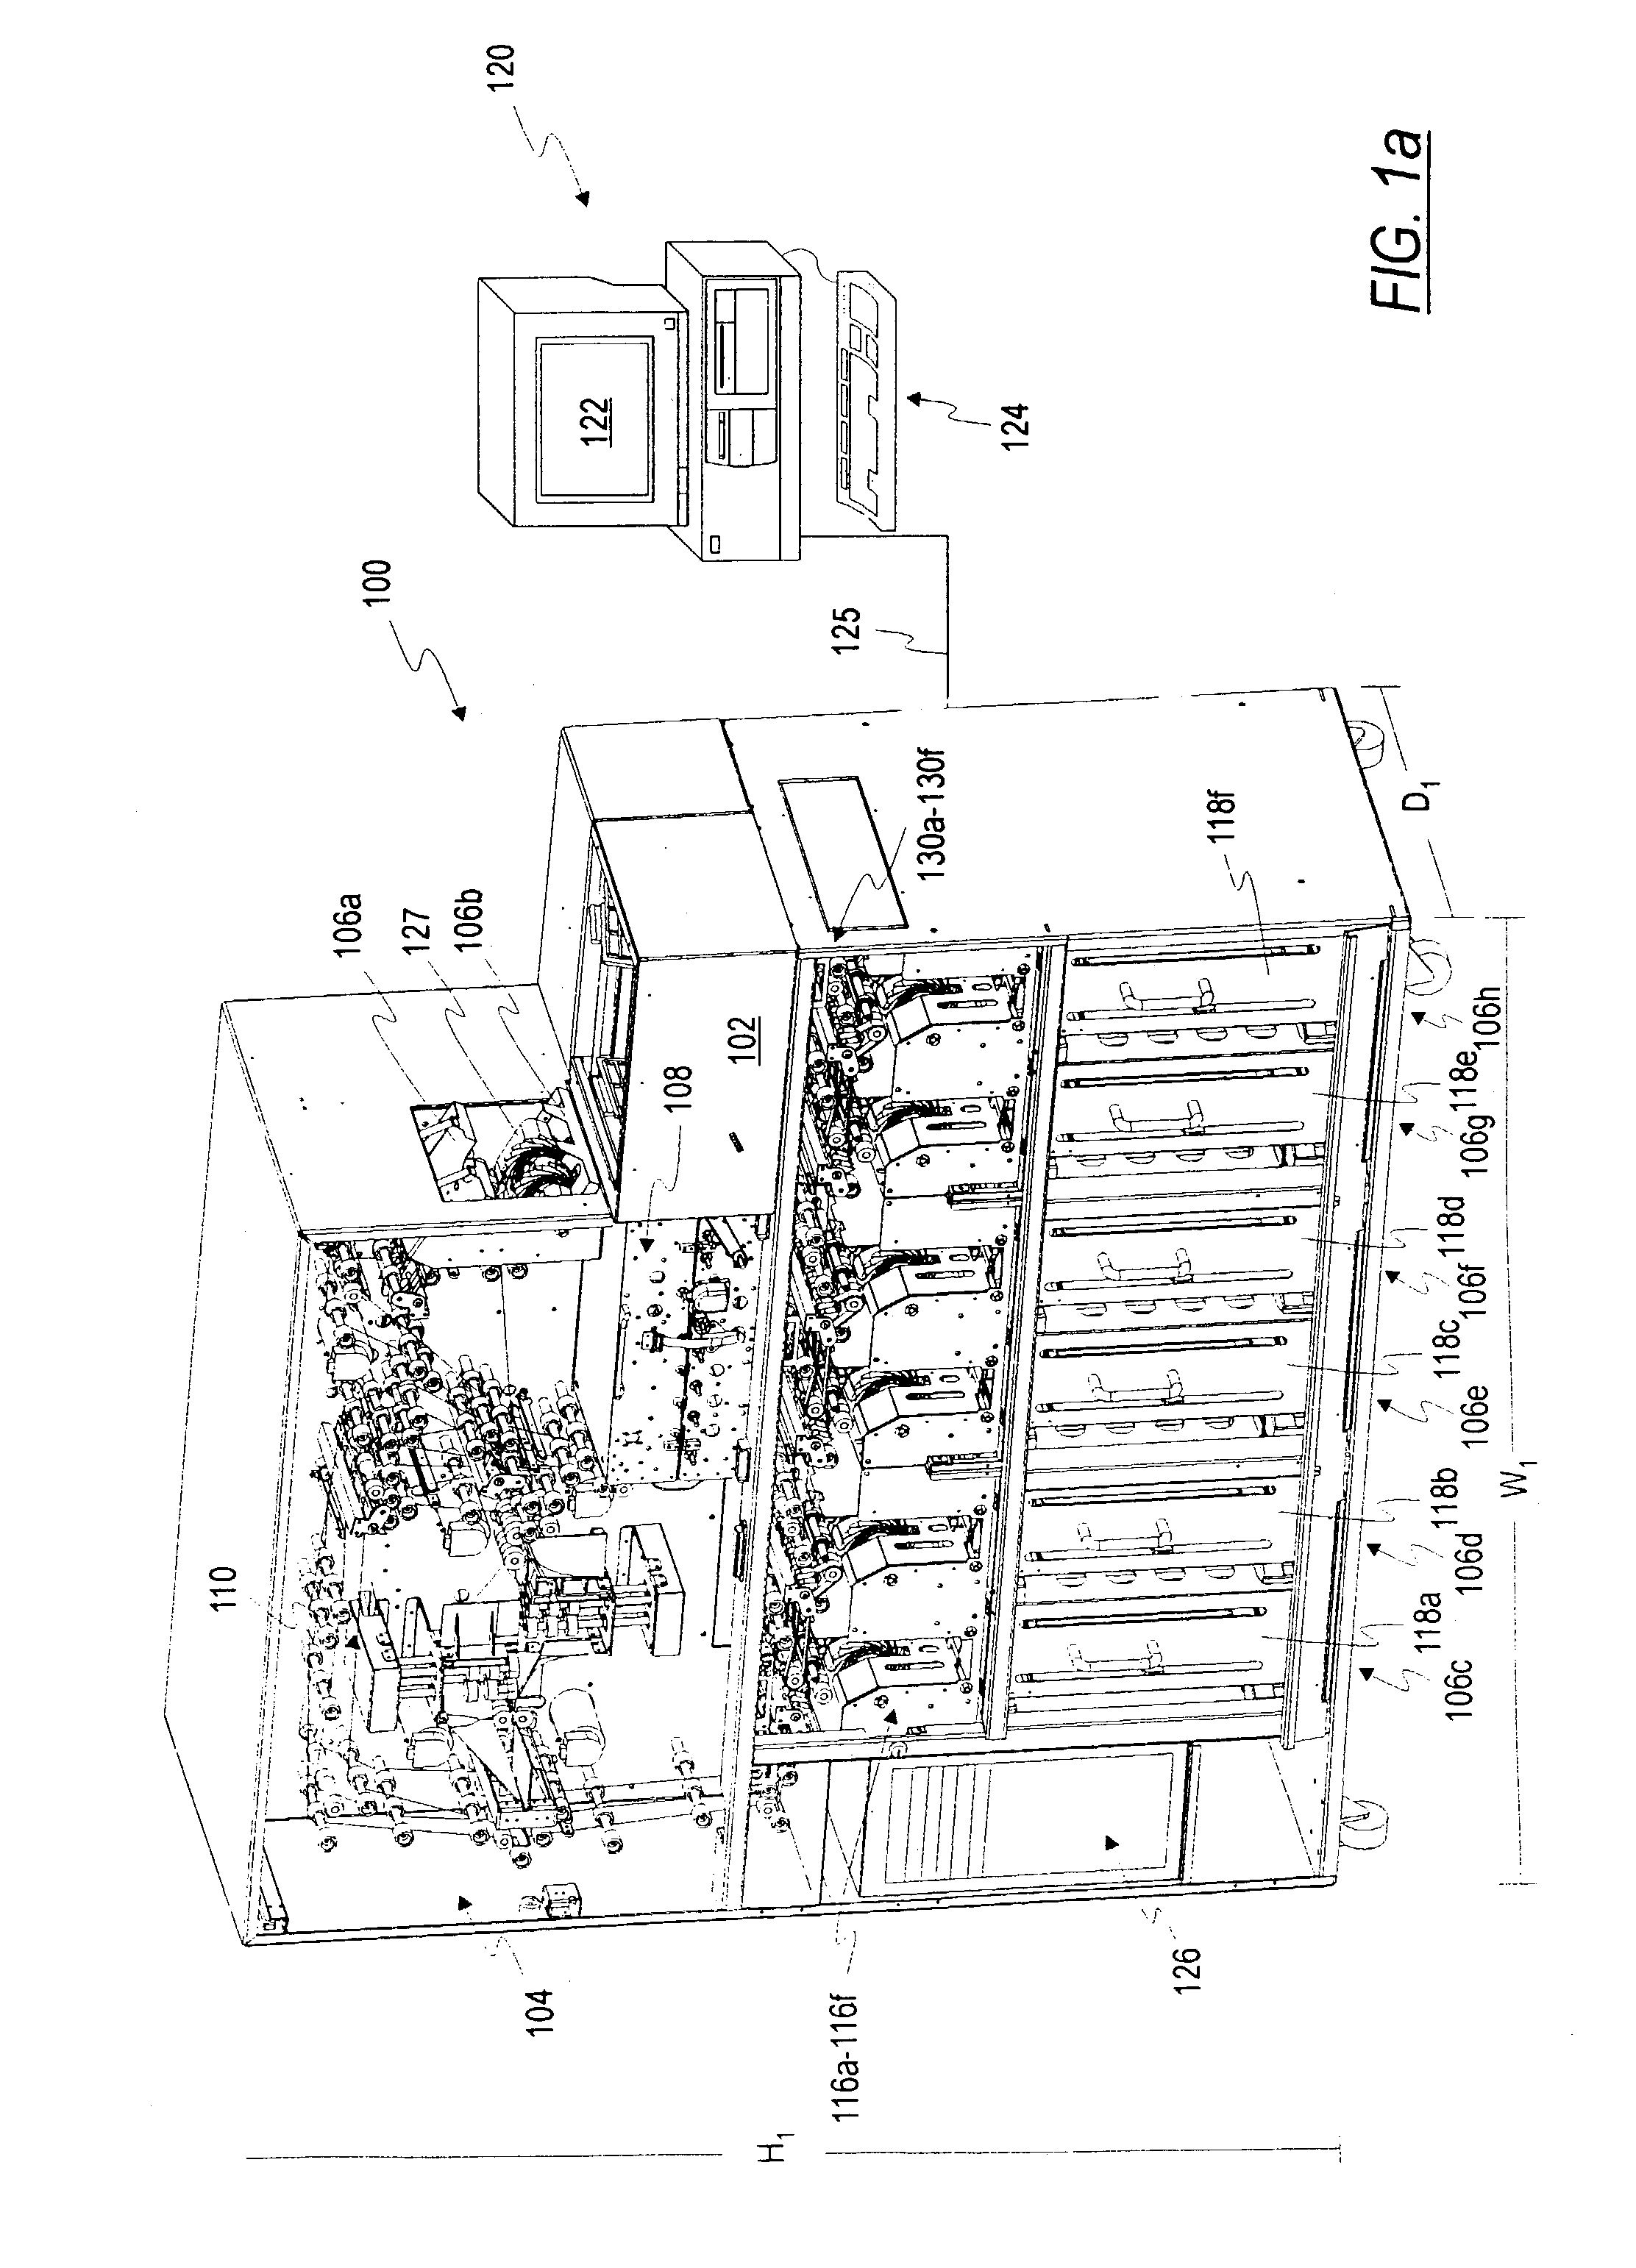 Currency handling system having multiple output receptacles